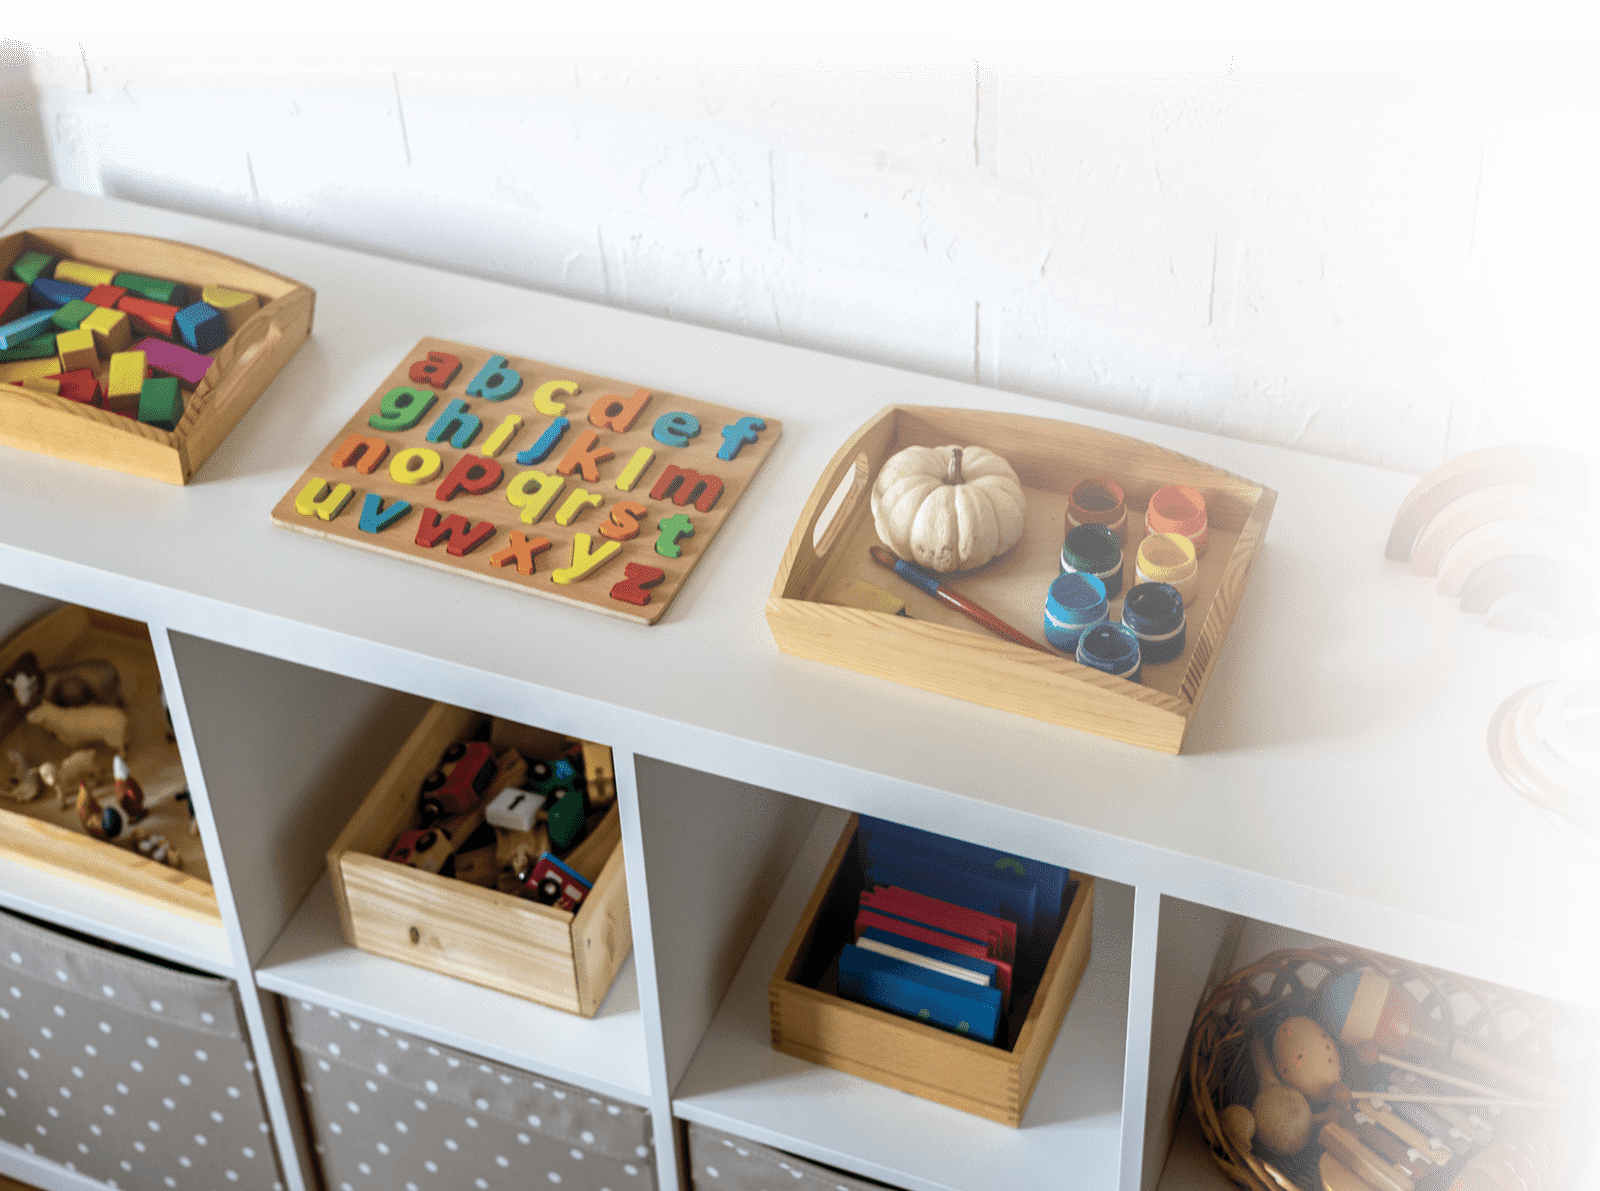 Kid storage shelf with toys and puzzles